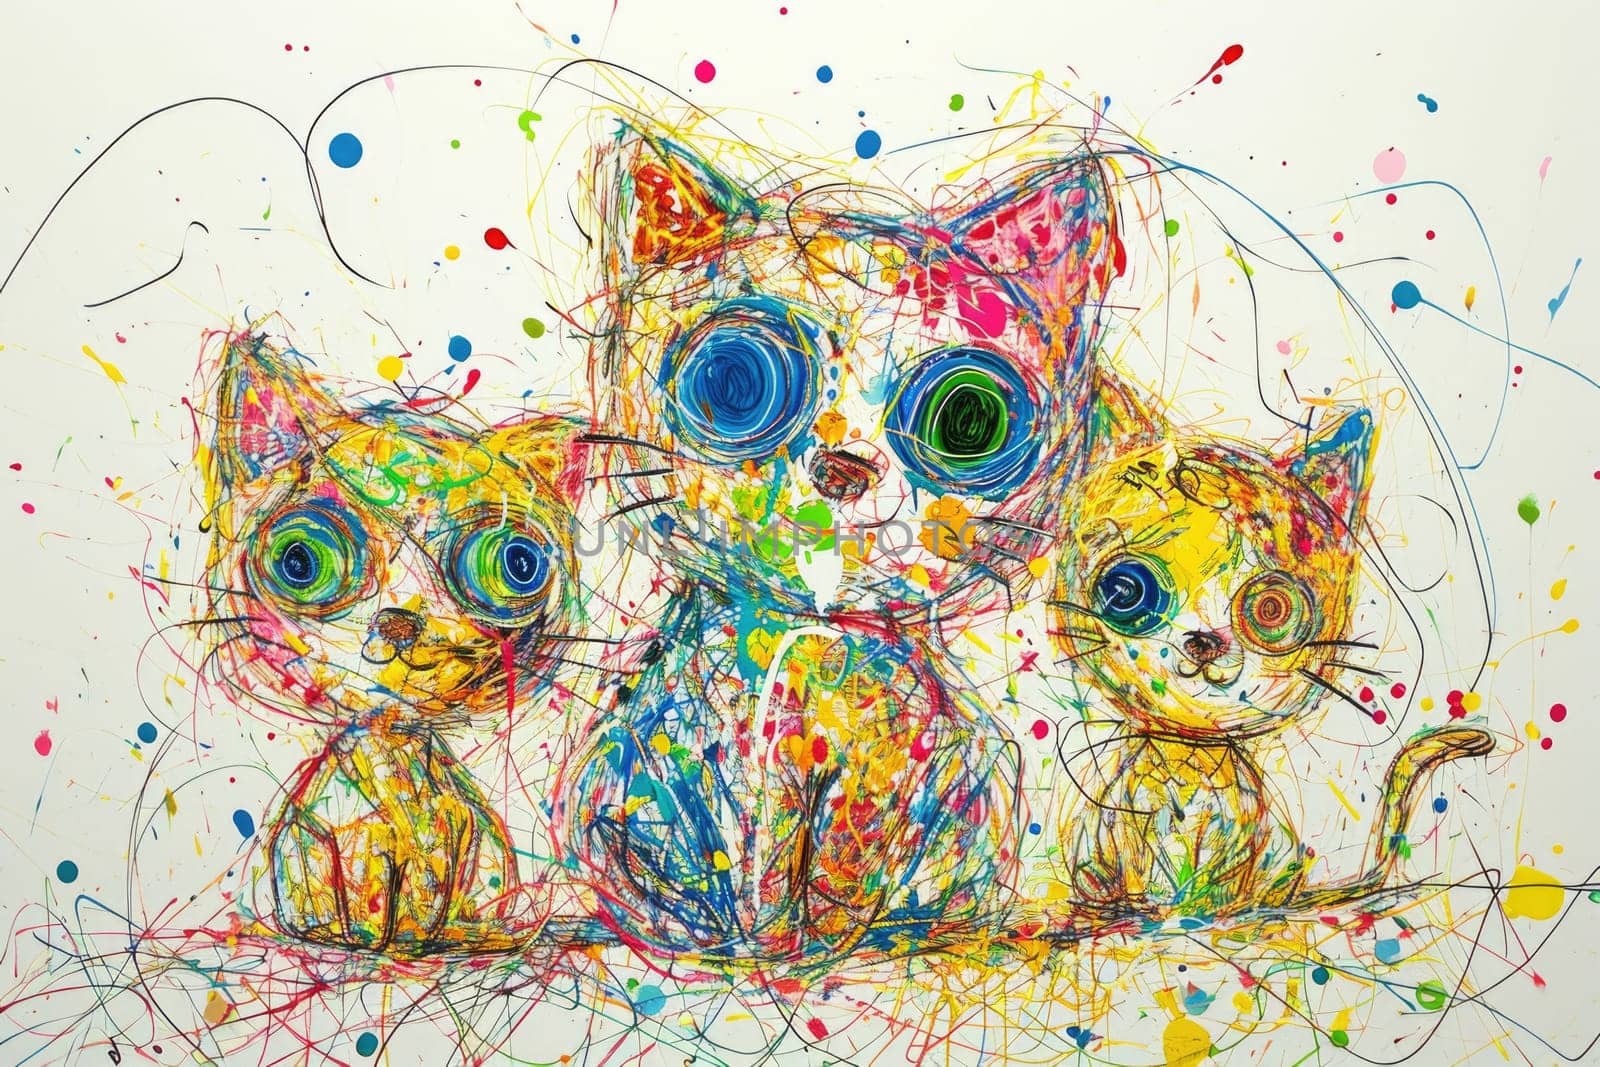 The hand drawing colourful picture of the group of the various type of the cat that has been drawn by the colored pencil or crayon on the white background that seem to be drawn by the child. AIGX01.